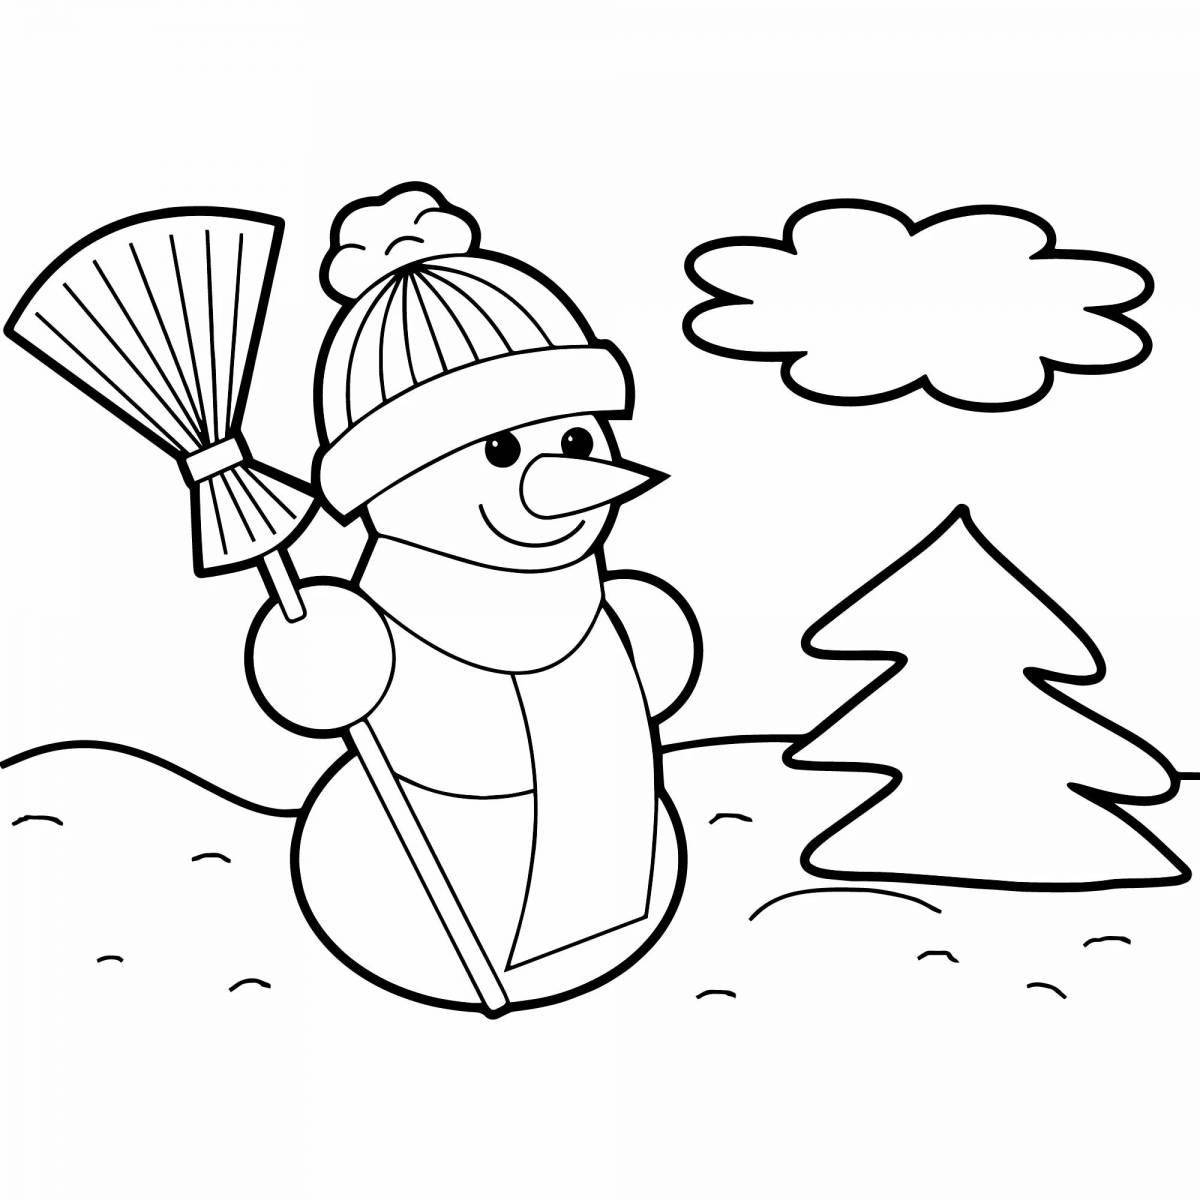 Winter coloring book for kids 4-5 years old